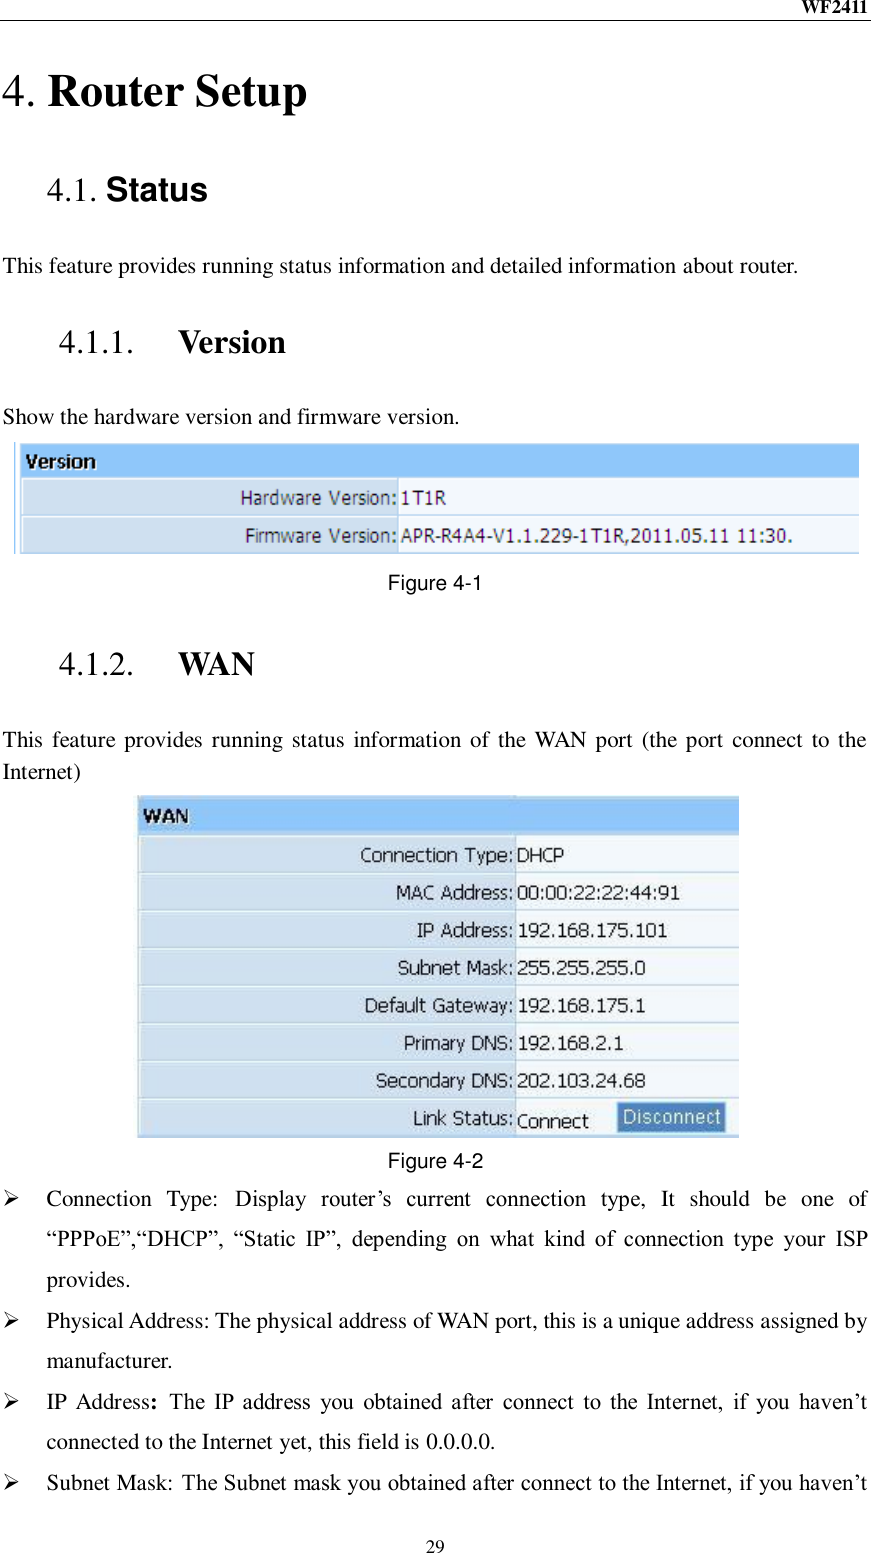 WF2411  29 4. Router Setup 4.1. Status This feature provides running status information and detailed information about router. 4.1.1. Version Show the hardware version and firmware version. Figure 4-1 4.1.2. WAN This feature provides  running status  information of the WAN port (the port connect to the Internet)  Figure 4-2  Connection  Type:  Display  router‟s  current  connection  type,  It  should  be  one  of “PPPoE”,“DHCP”,  “Static  IP”,  depending  on  what  kind  of  connection  type  your  ISP provides.  Physical Address: The physical address of WAN port, this is a unique address assigned by manufacturer.  IP  Address:  The  IP  address  you  obtained  after  connect  to  the  Internet,  if  you  haven‟t connected to the Internet yet, this field is 0.0.0.0.  Subnet Mask: The Subnet mask you obtained after connect to the Internet, if you haven‟t 